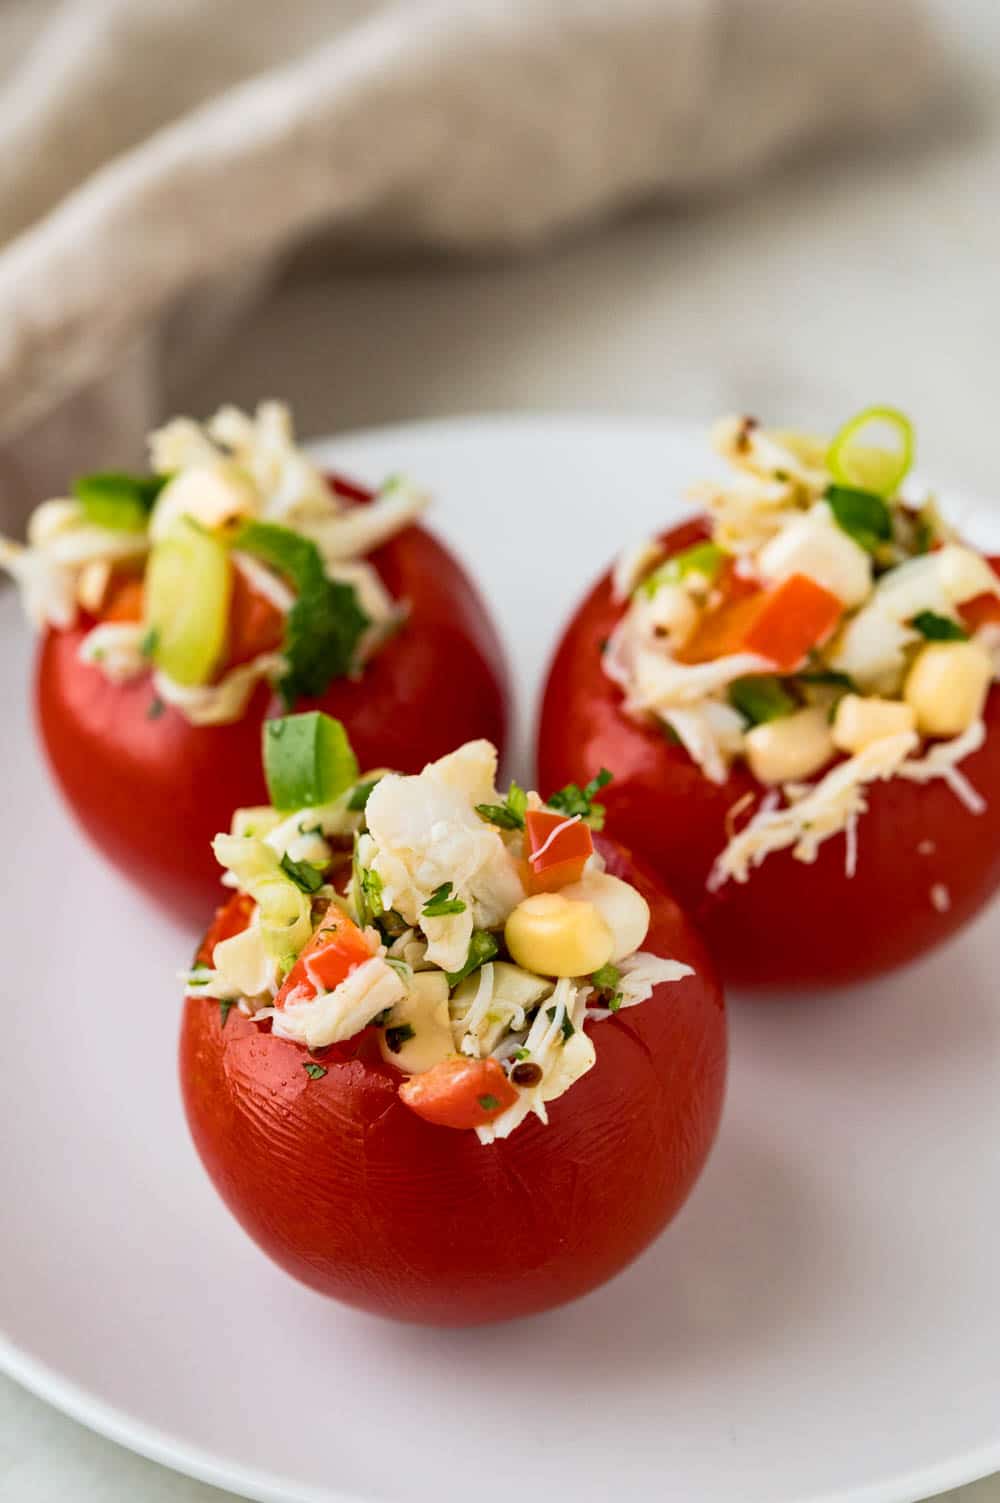 stuffing campari tomatoes with the crabmeat salad recipe.